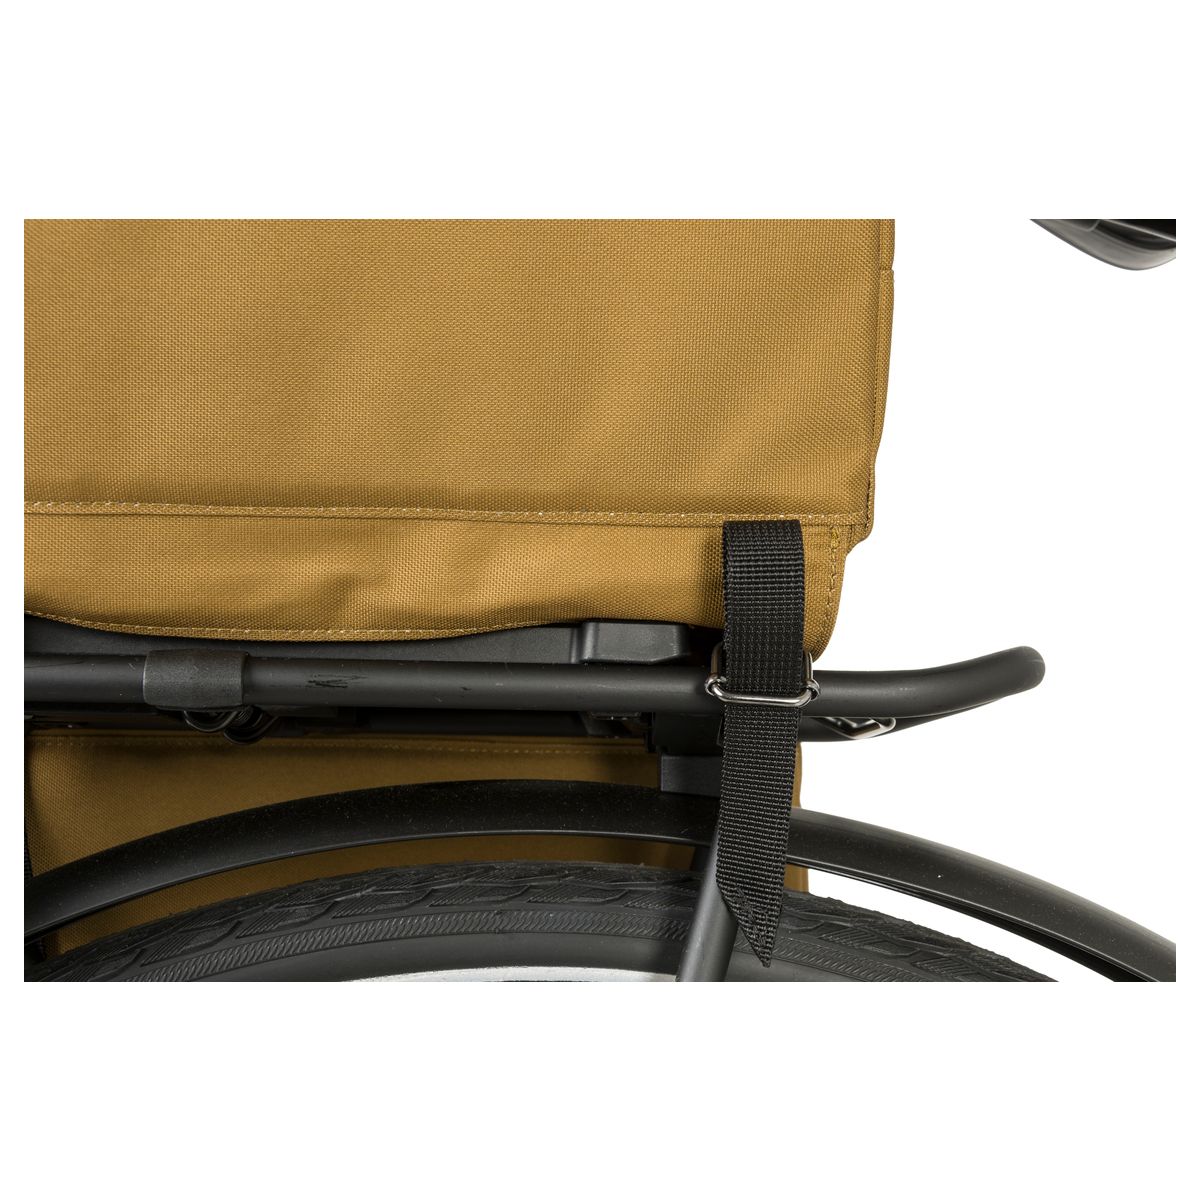 DWR Double Bike Bag Urban fit example